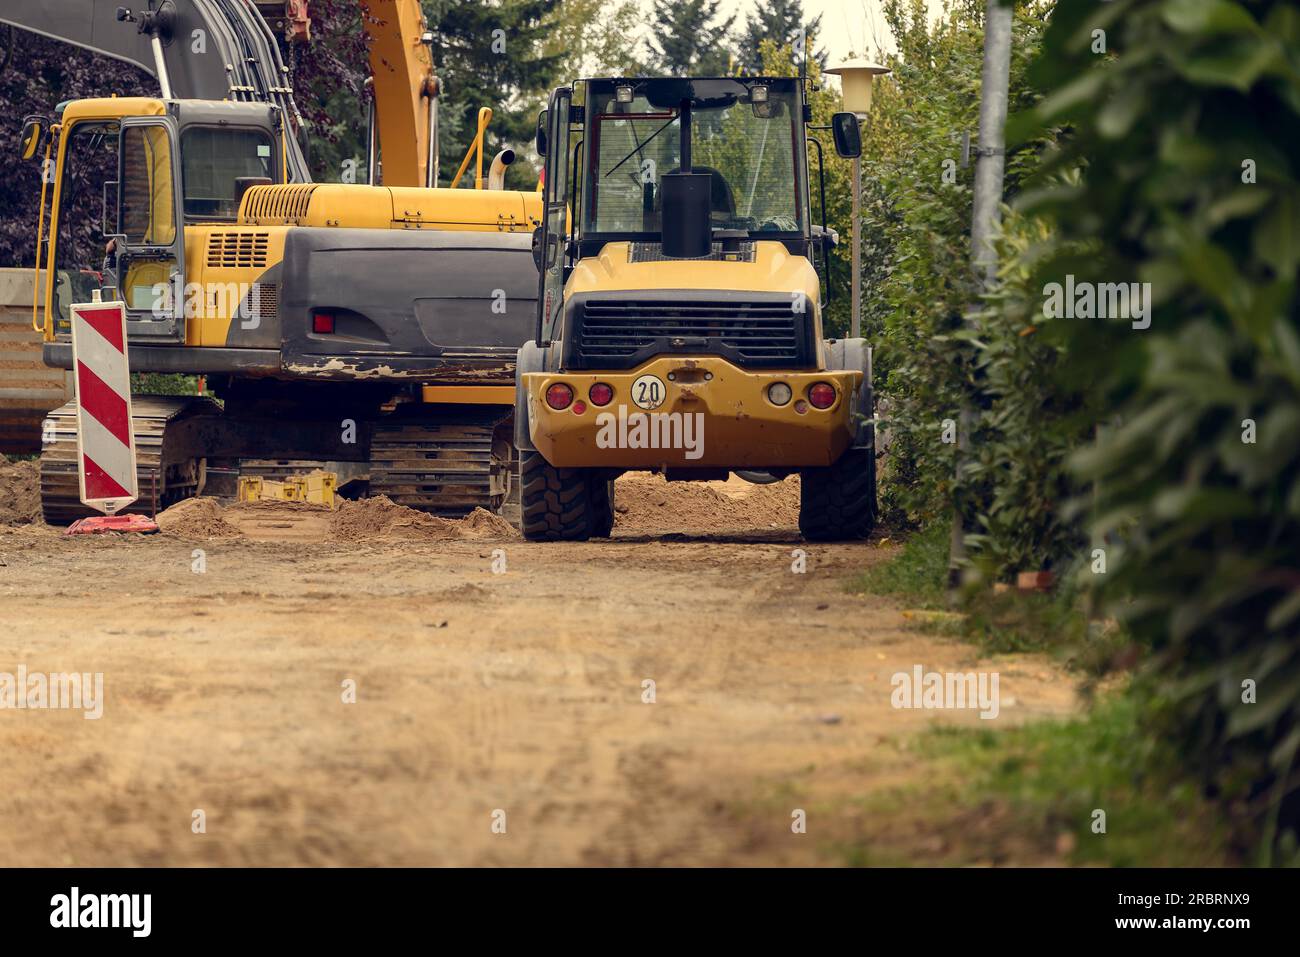 Variety of Construction Heavy Machinery Outdoors on Dirt Surface Stock Photo